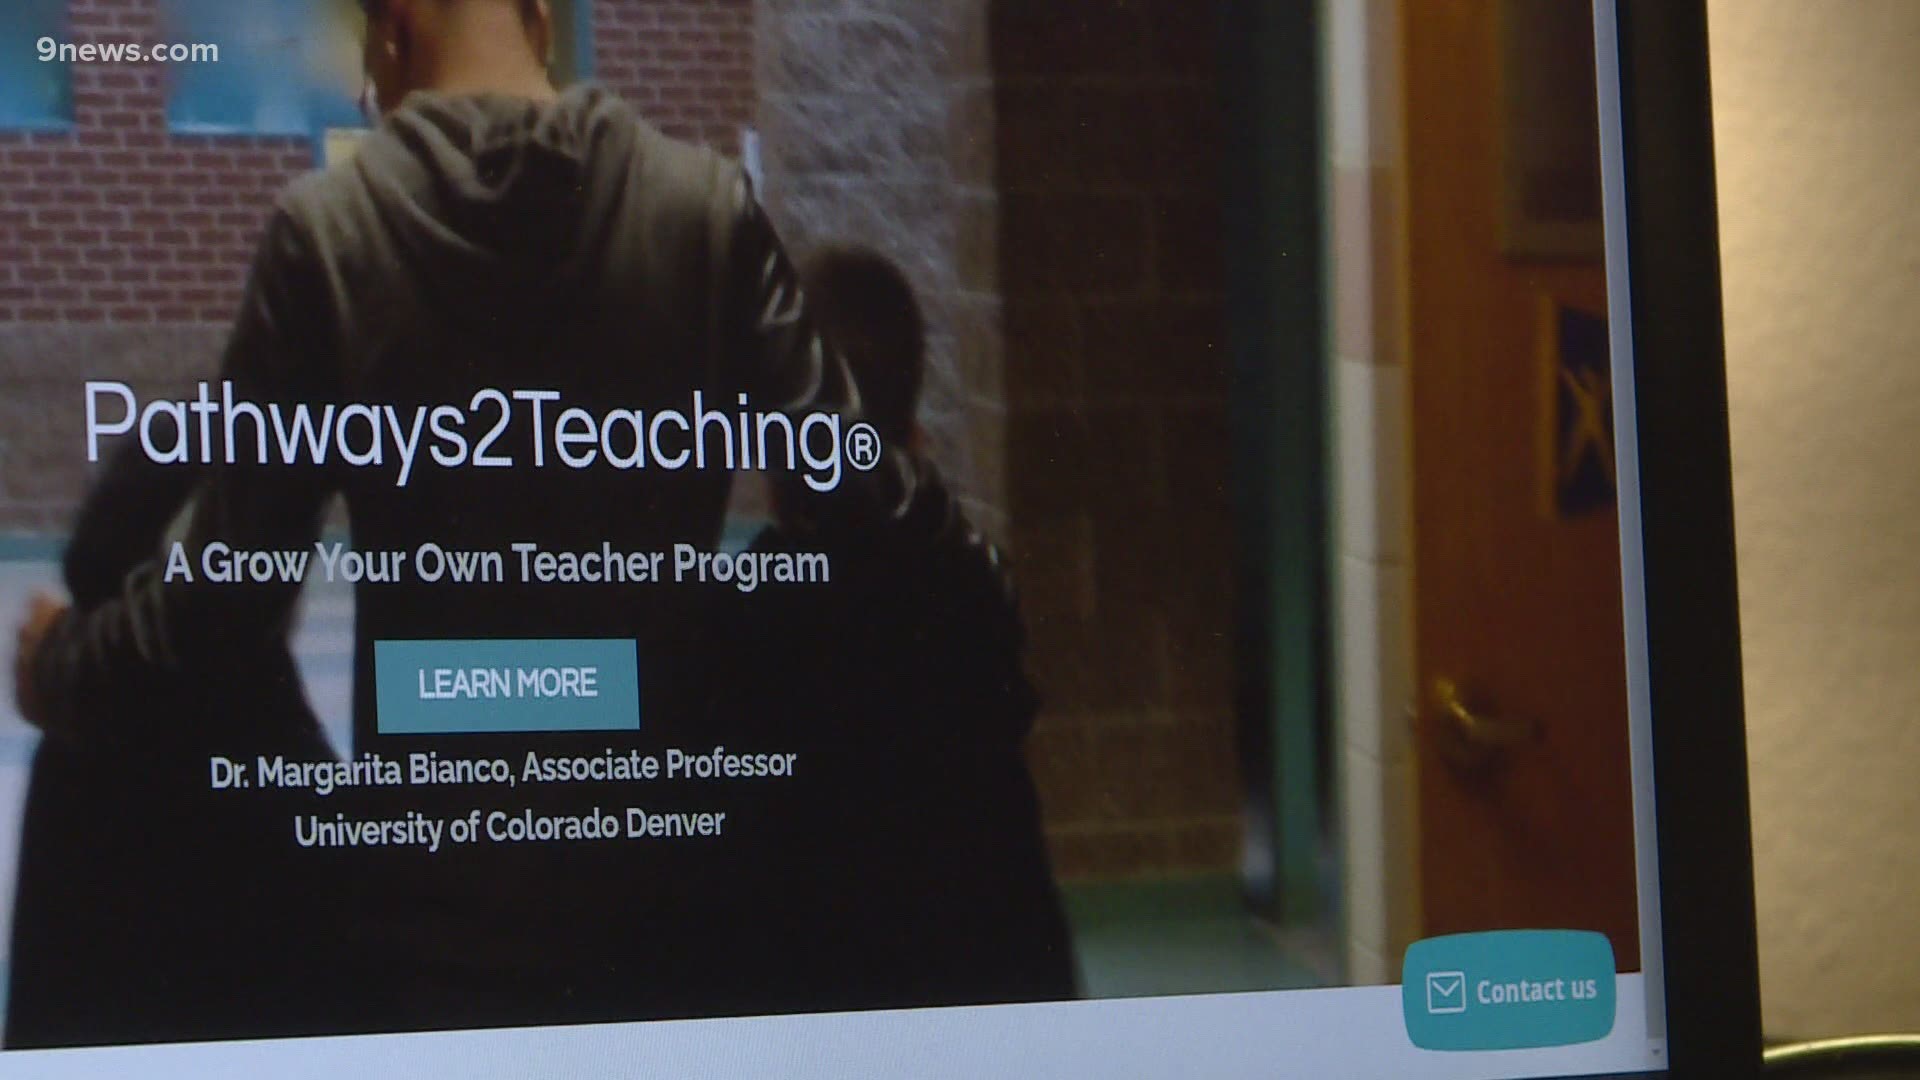 The University of Colorado Denver's Pathways2Teaching program recruits young people of color interested in becoming educators to bridge diversity gaps.